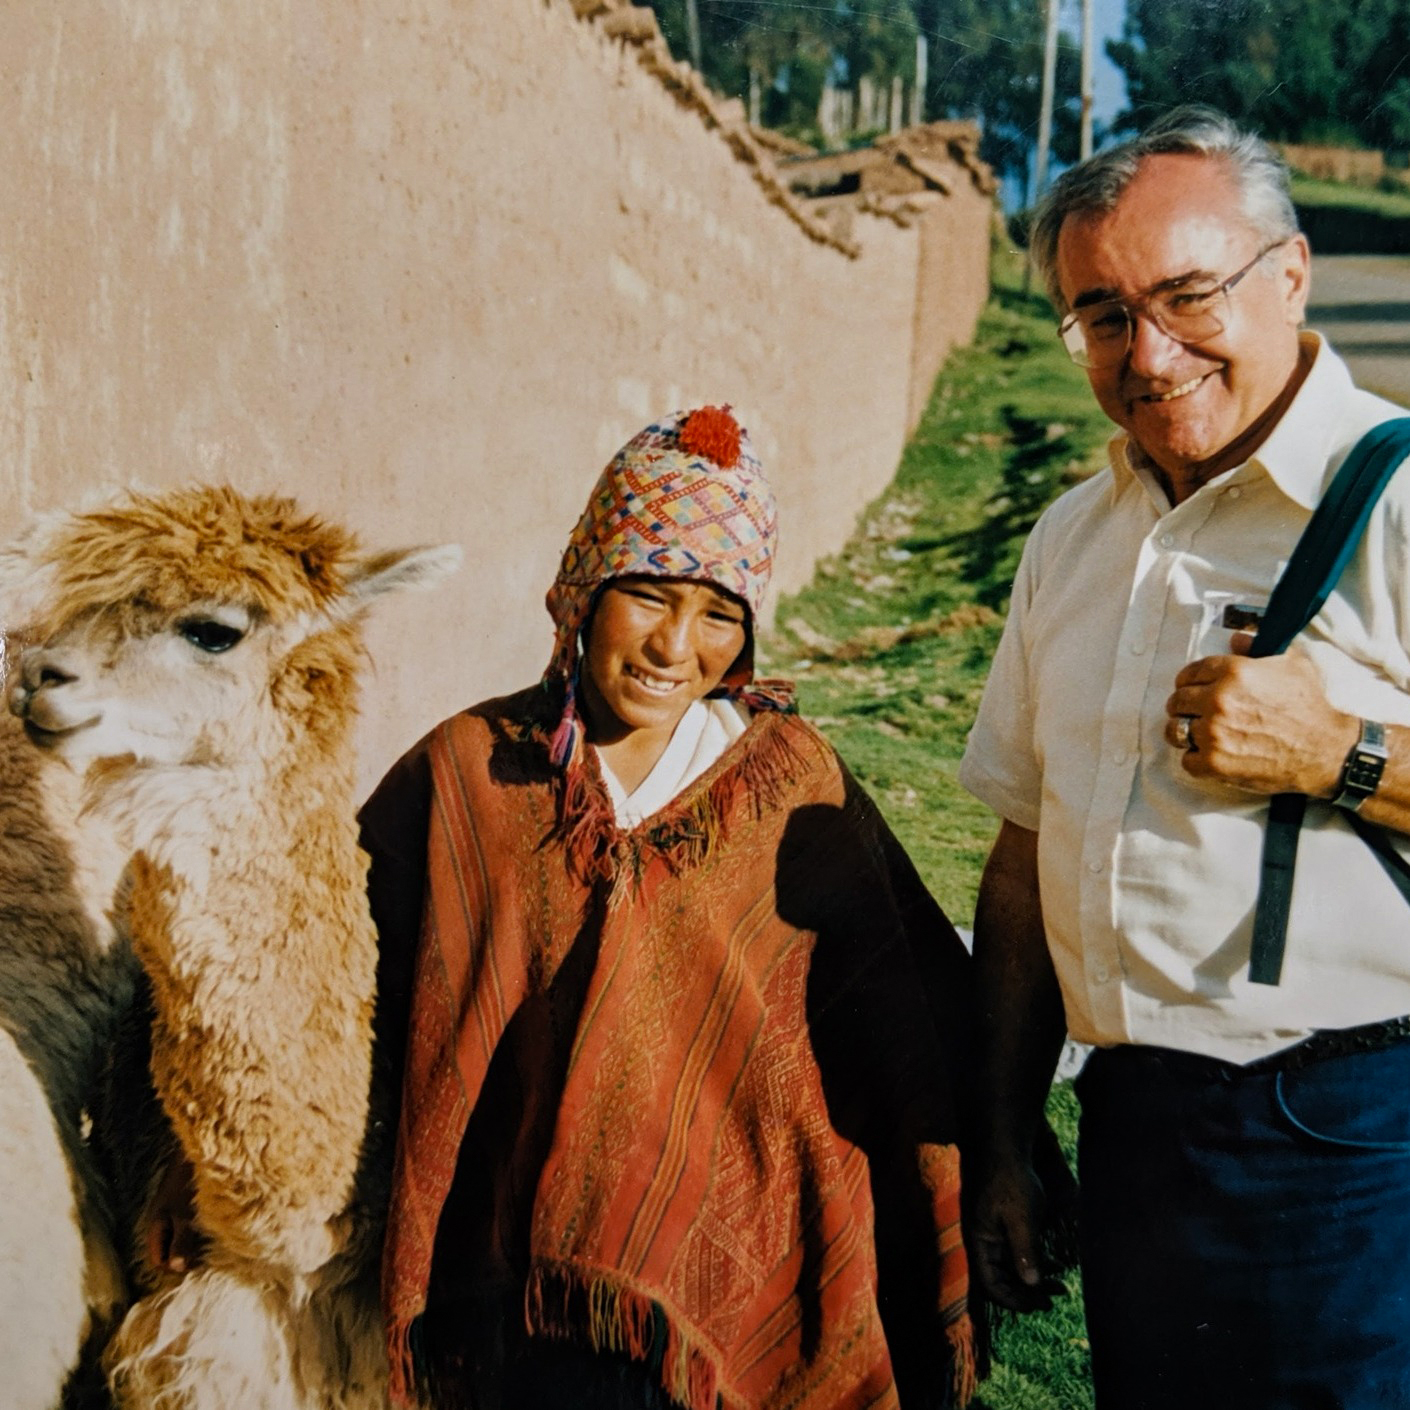 Fr Louie stands next to a young peruvian farmer and their llama